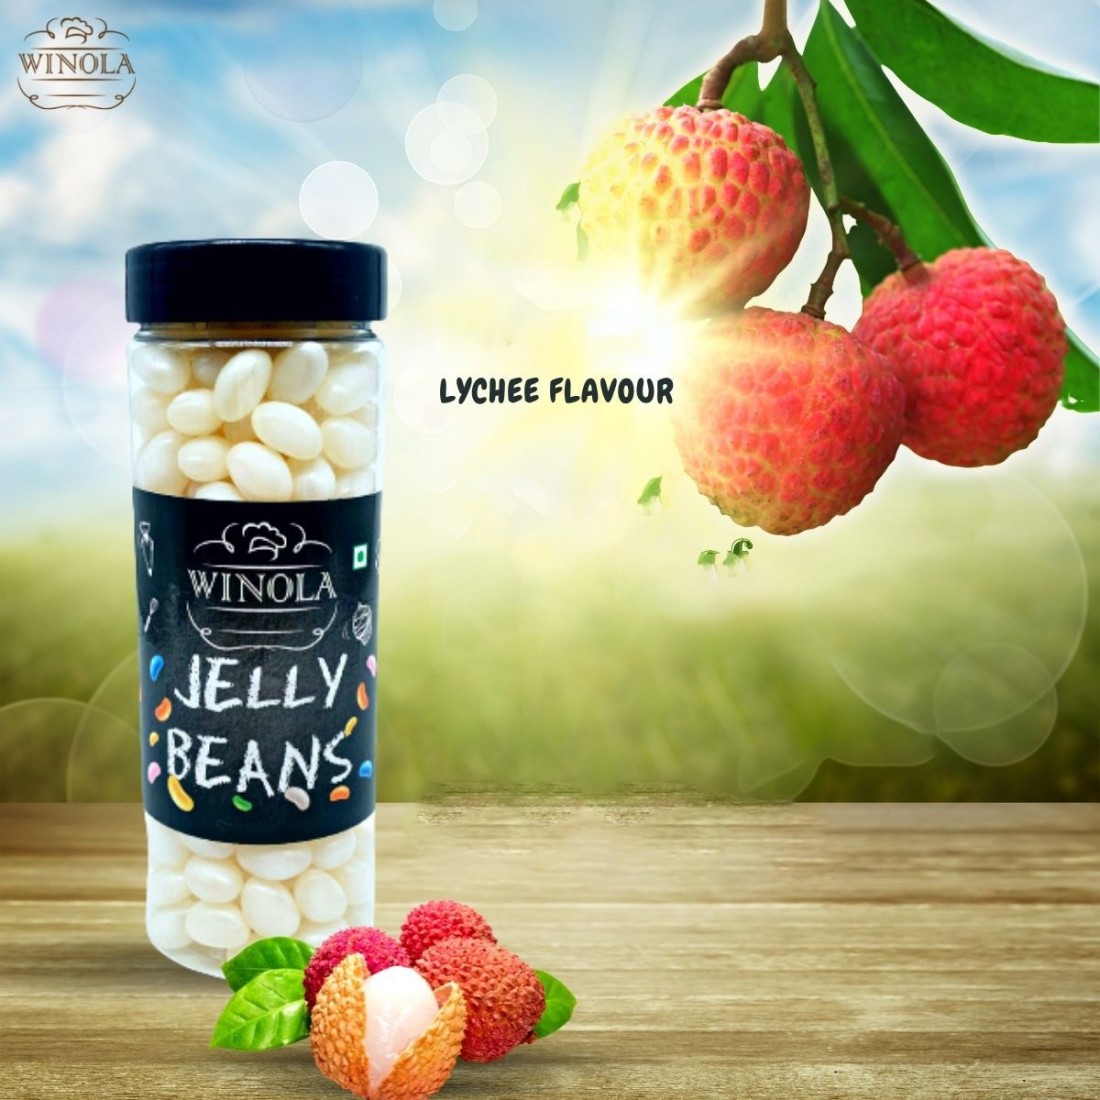 Winola Jelly Beans - Lychee Flavour Jelly Candy (280g) Lychee